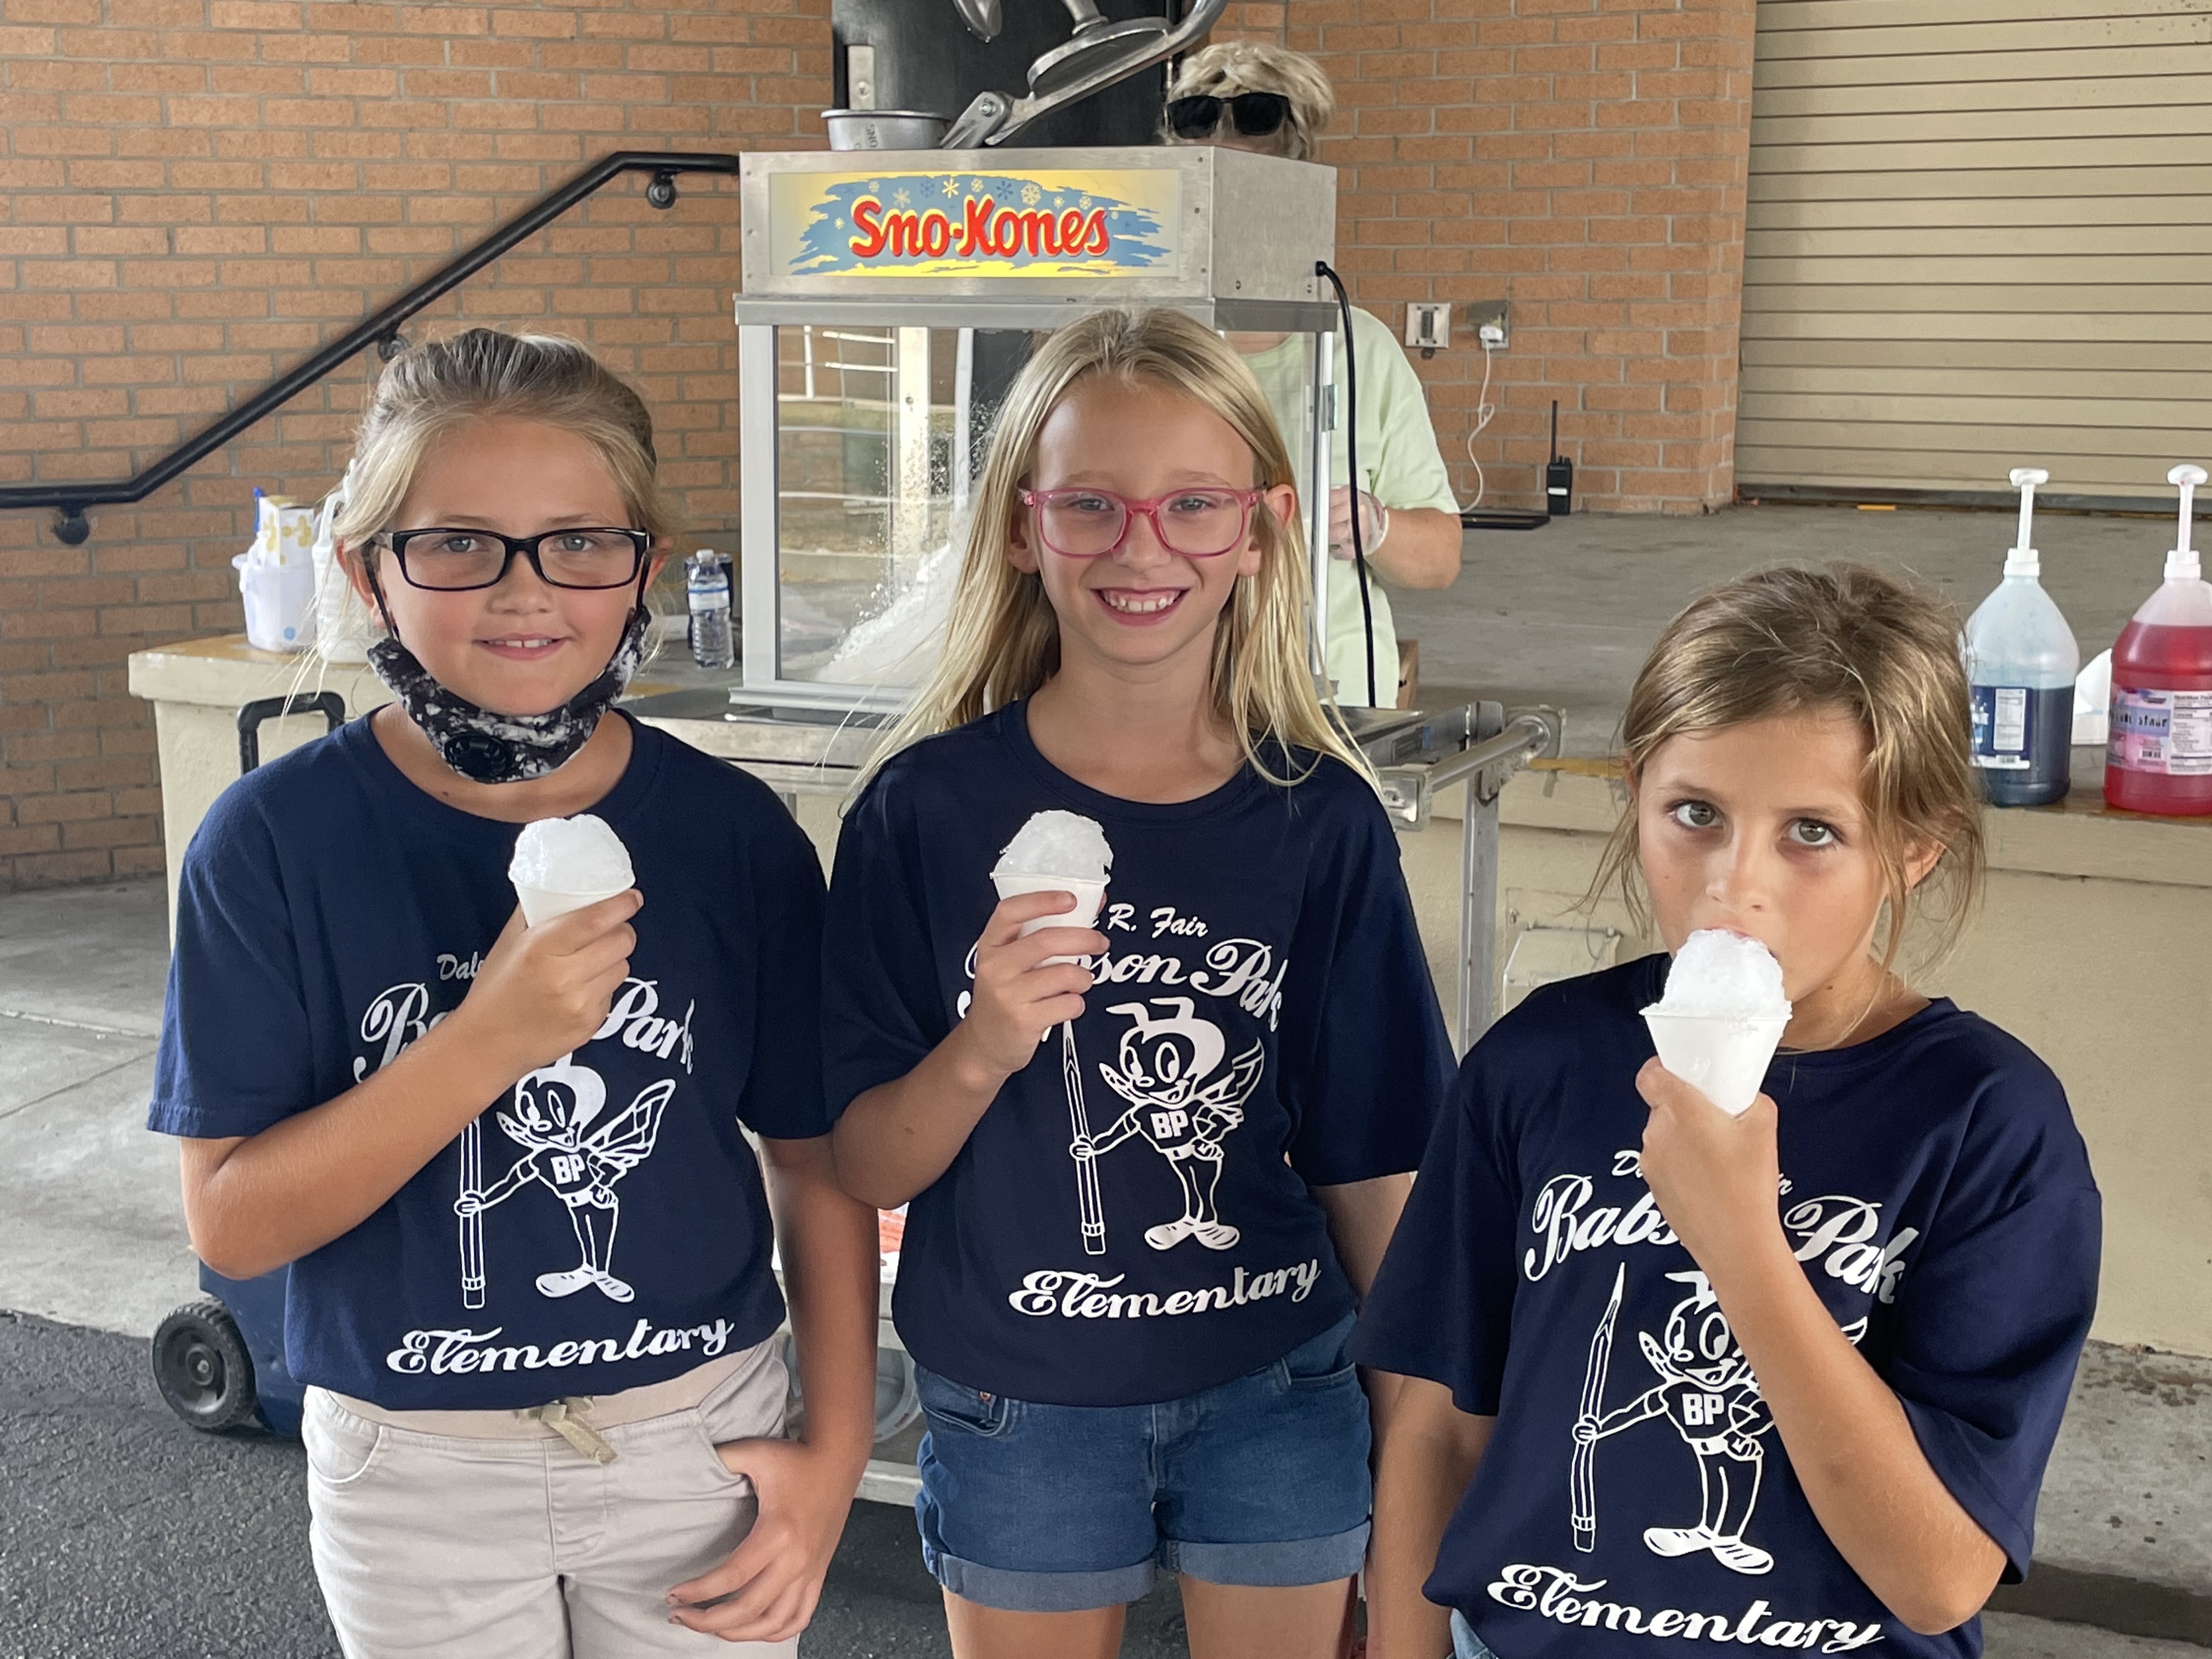 Students eating a snow cone